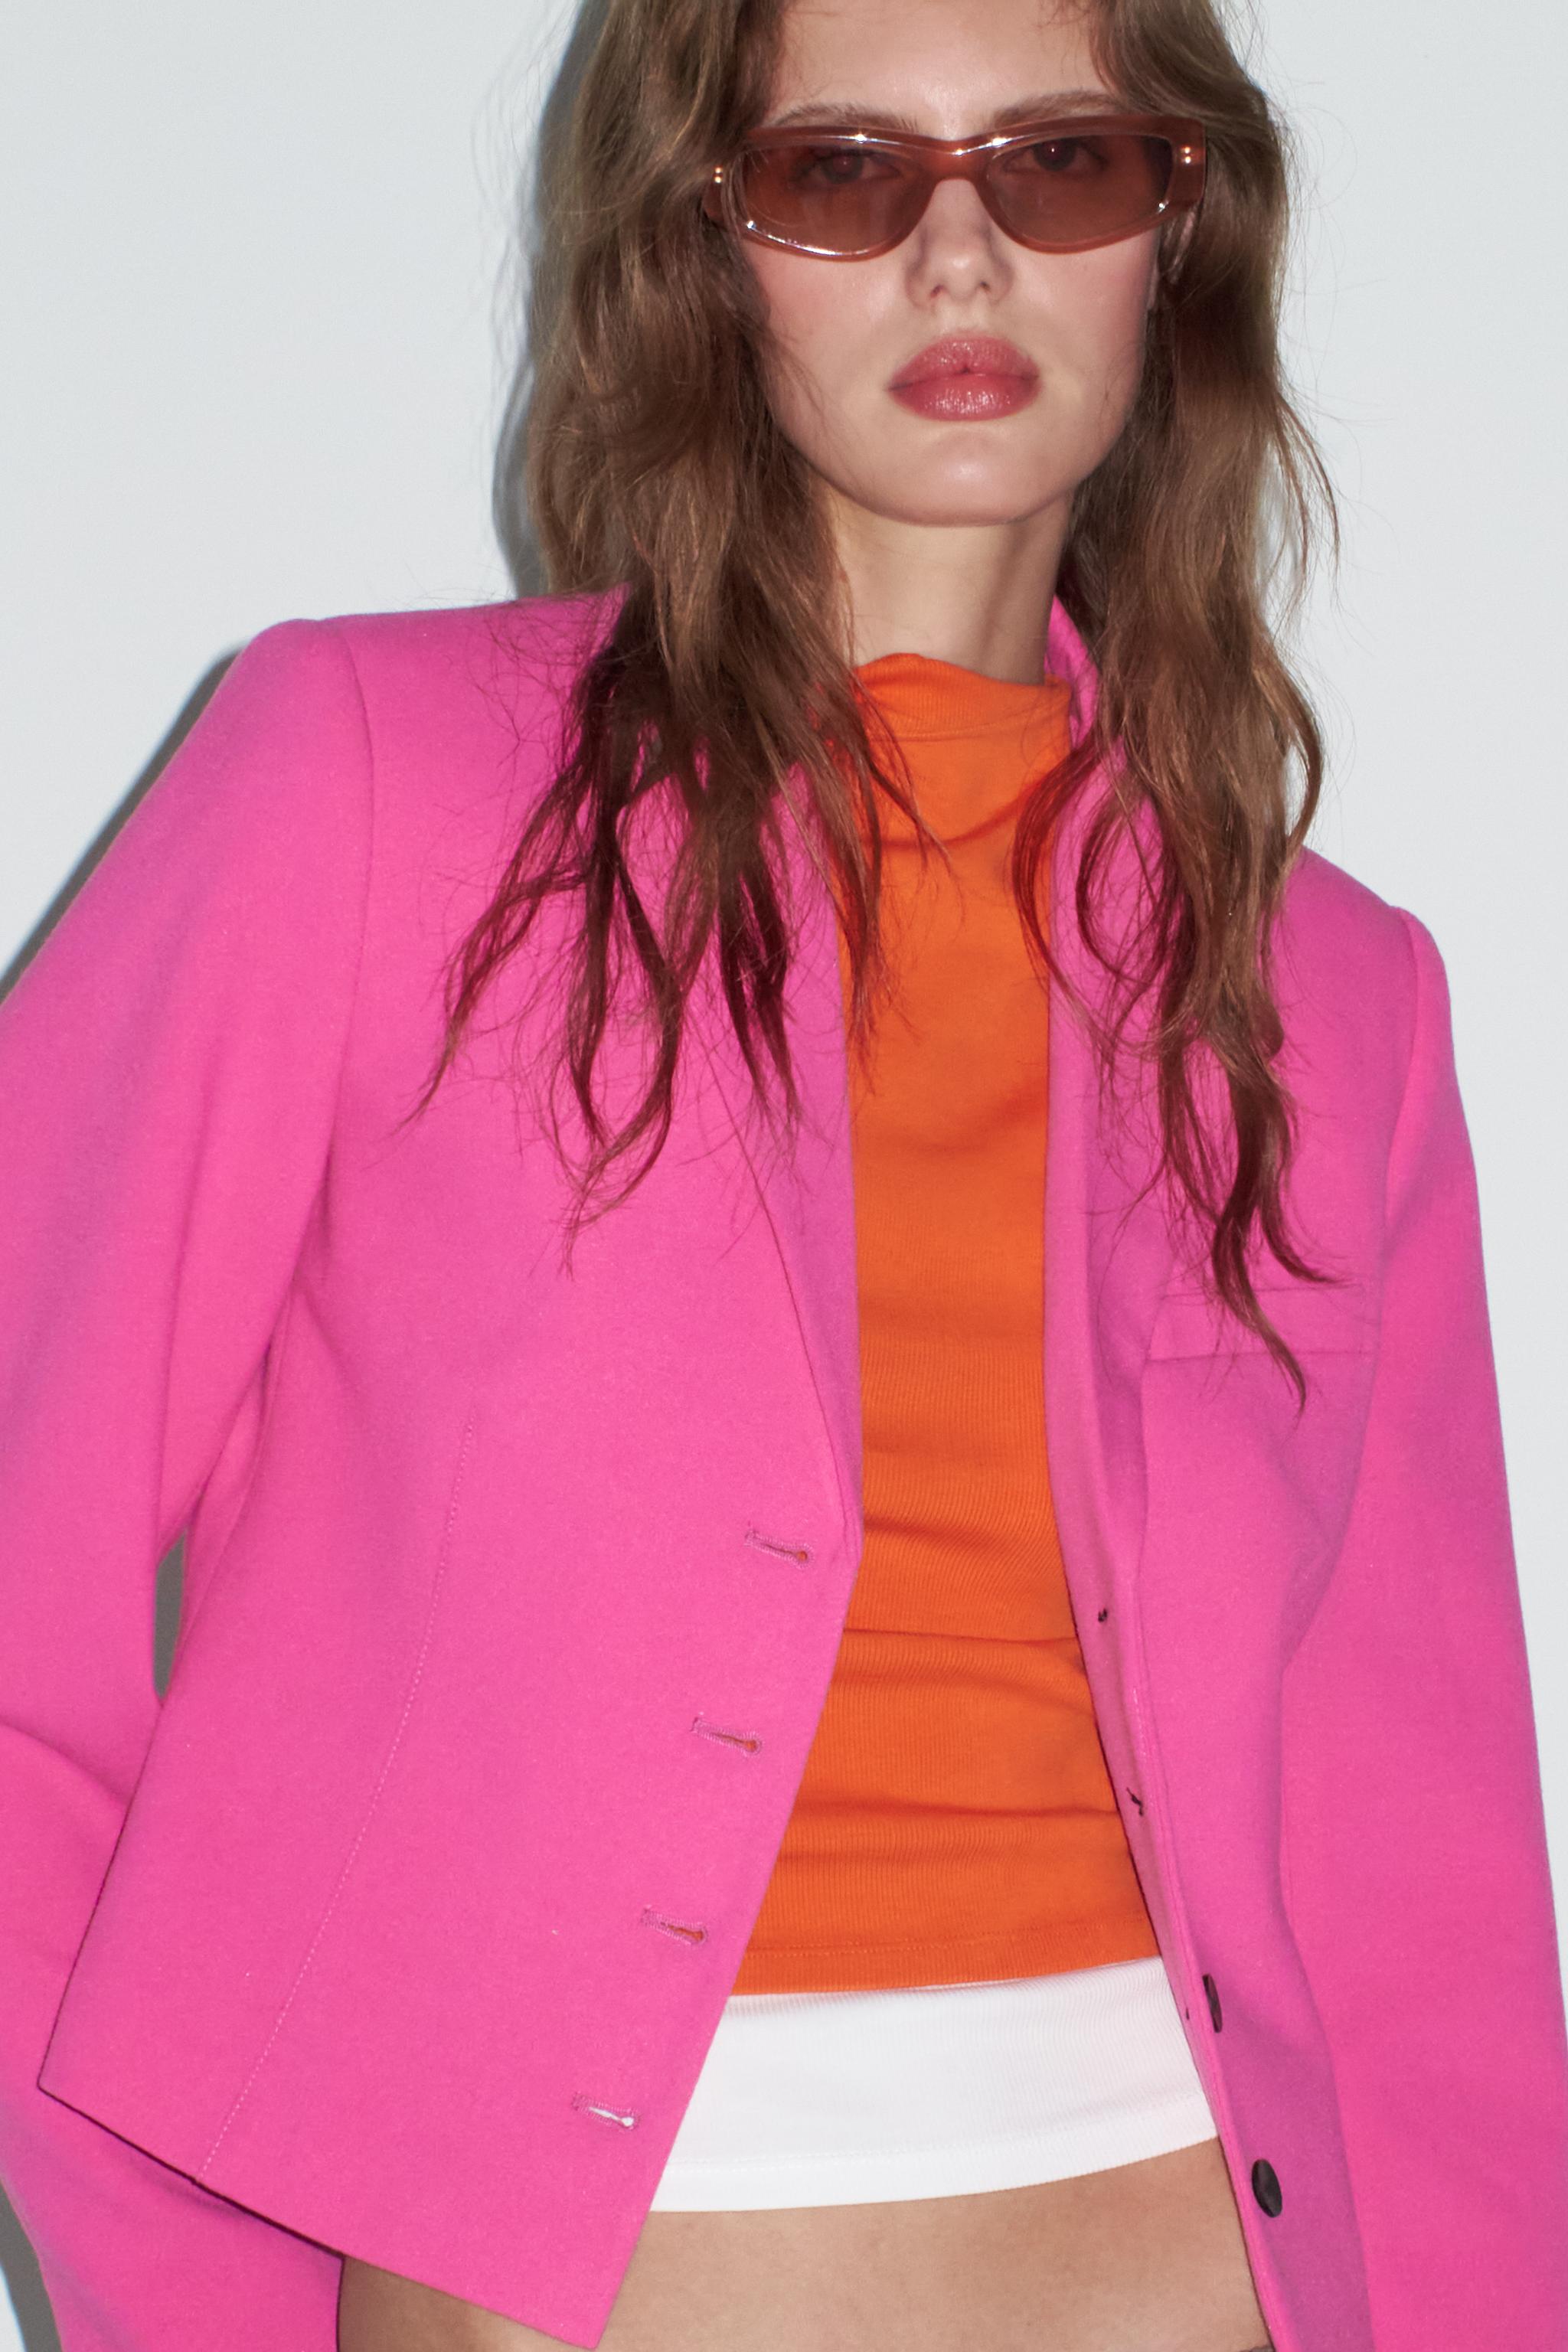 This totally affordable pink Zara suit is the spring outfit all